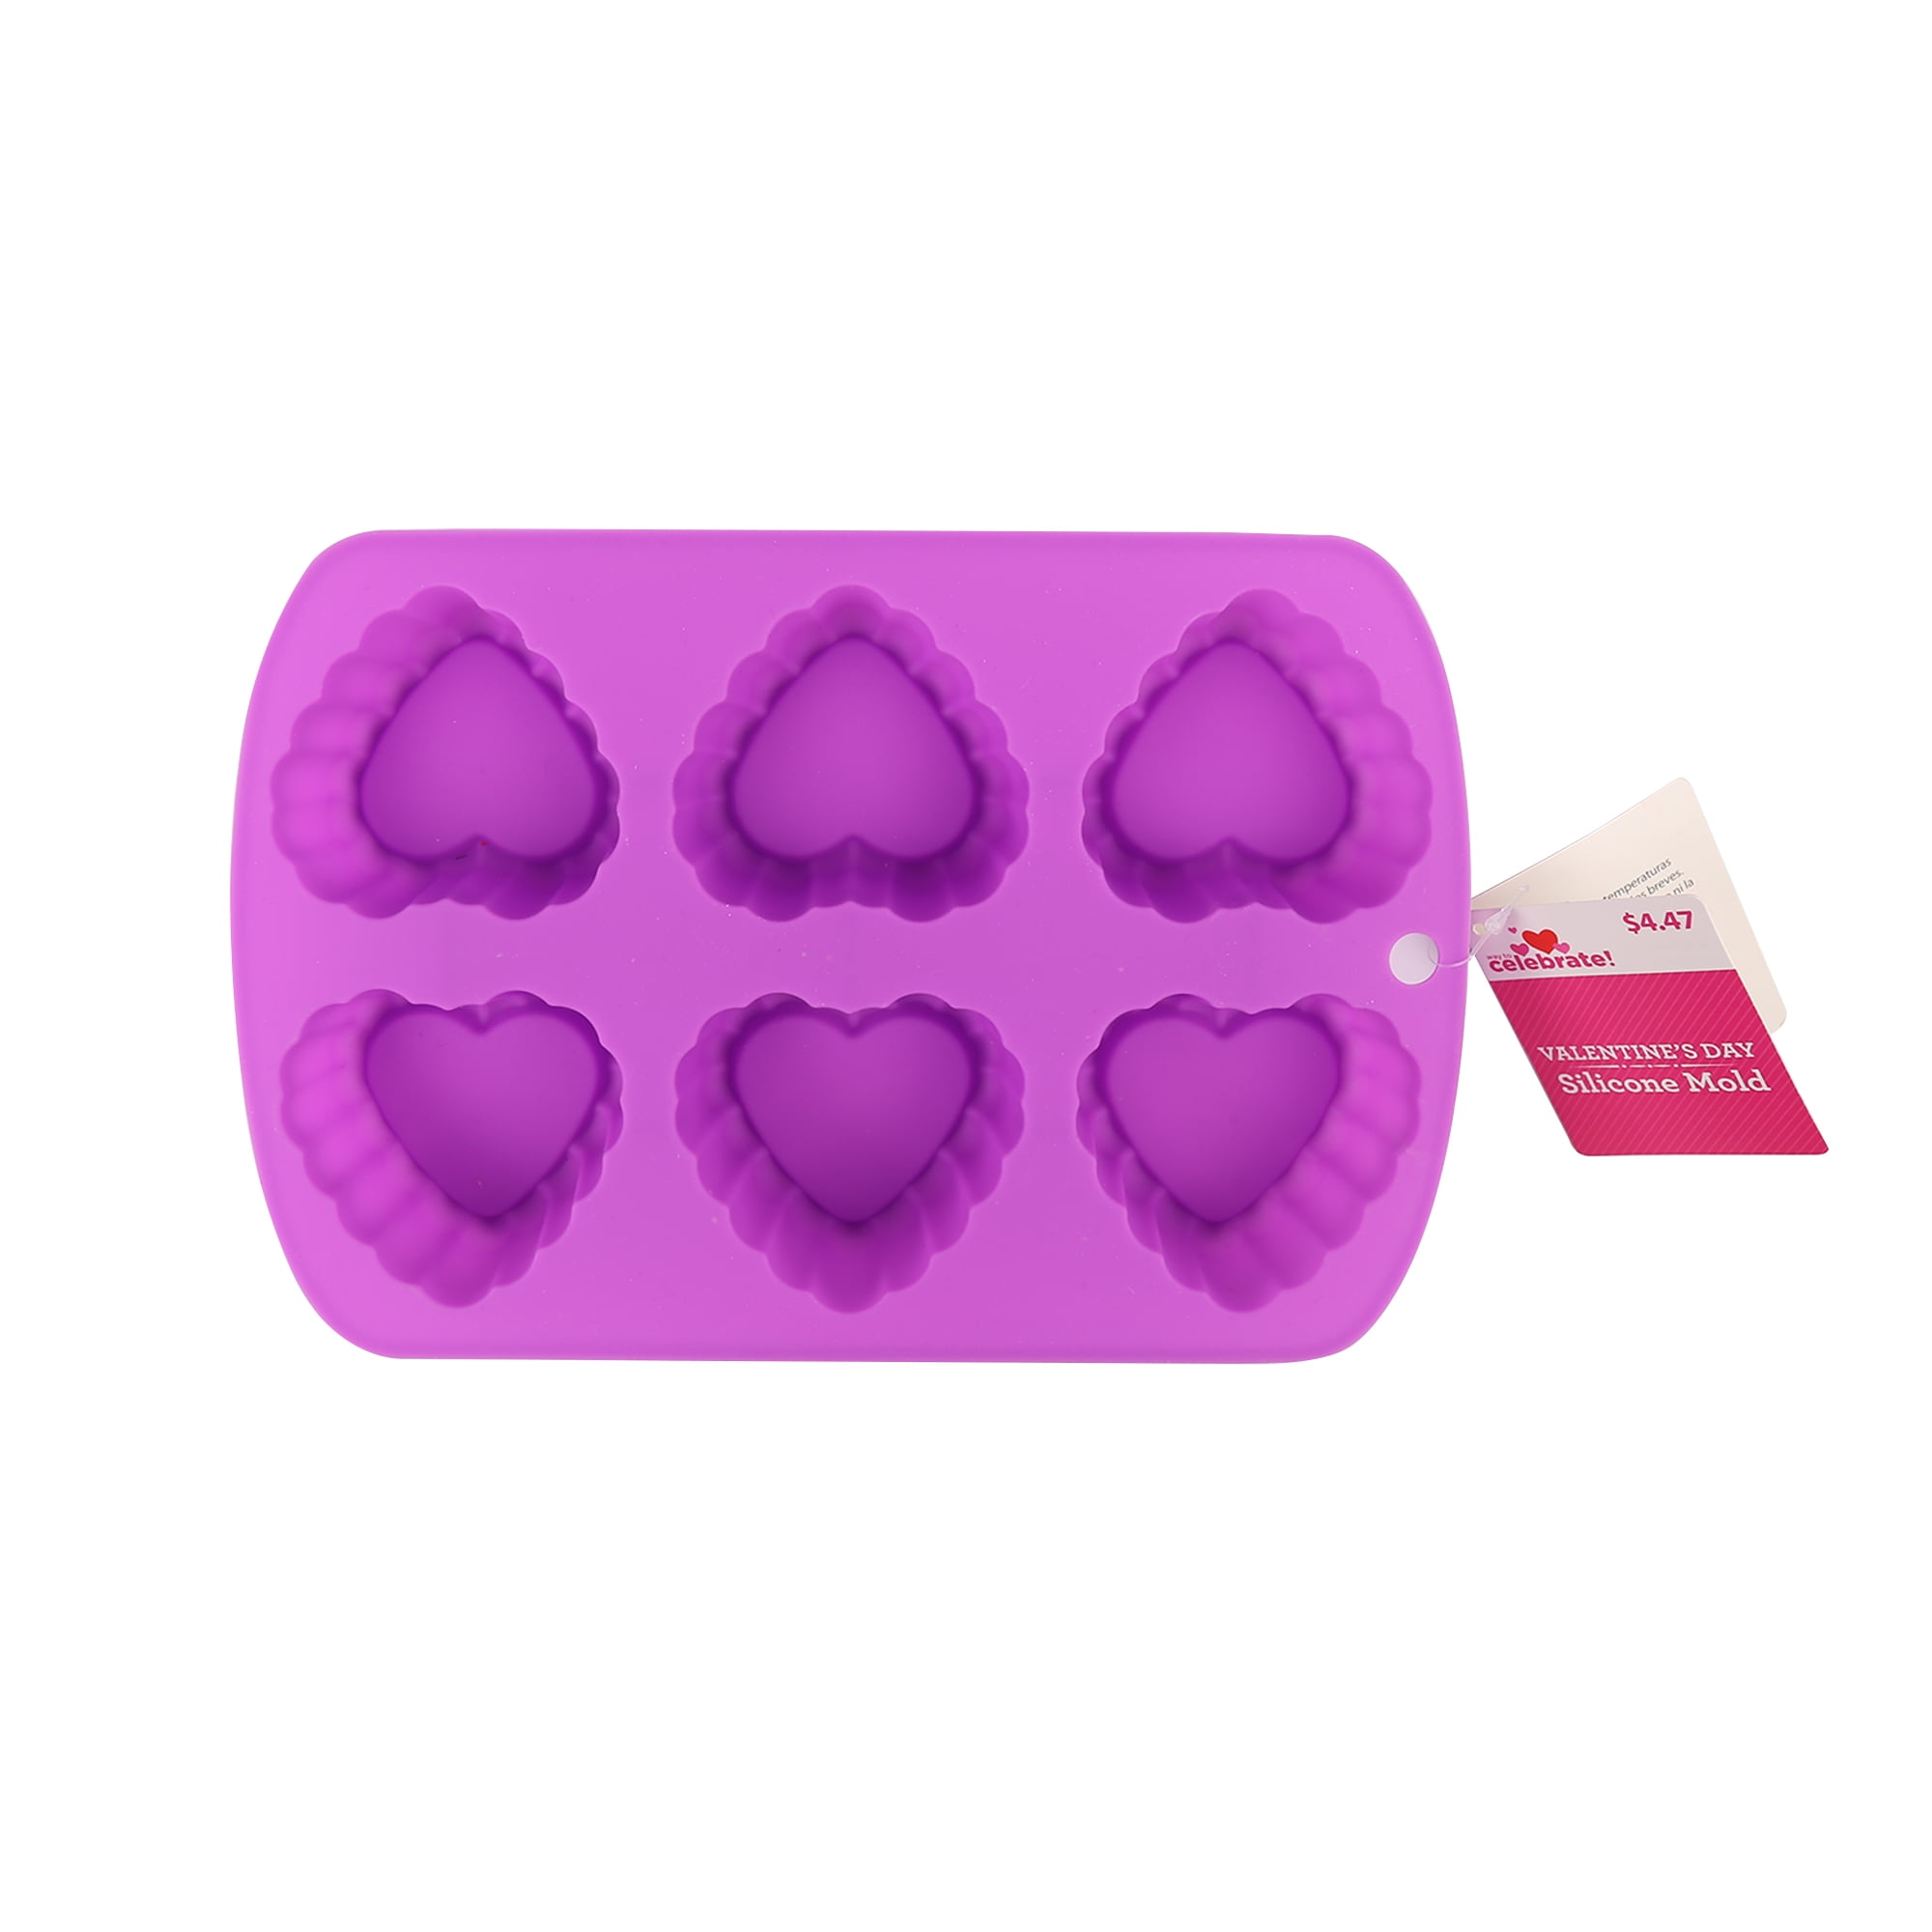 WAY TO CELEBRATE! Way To Celebrate Valentine's Day Purple 6ct Heart Silicone Cake Mold